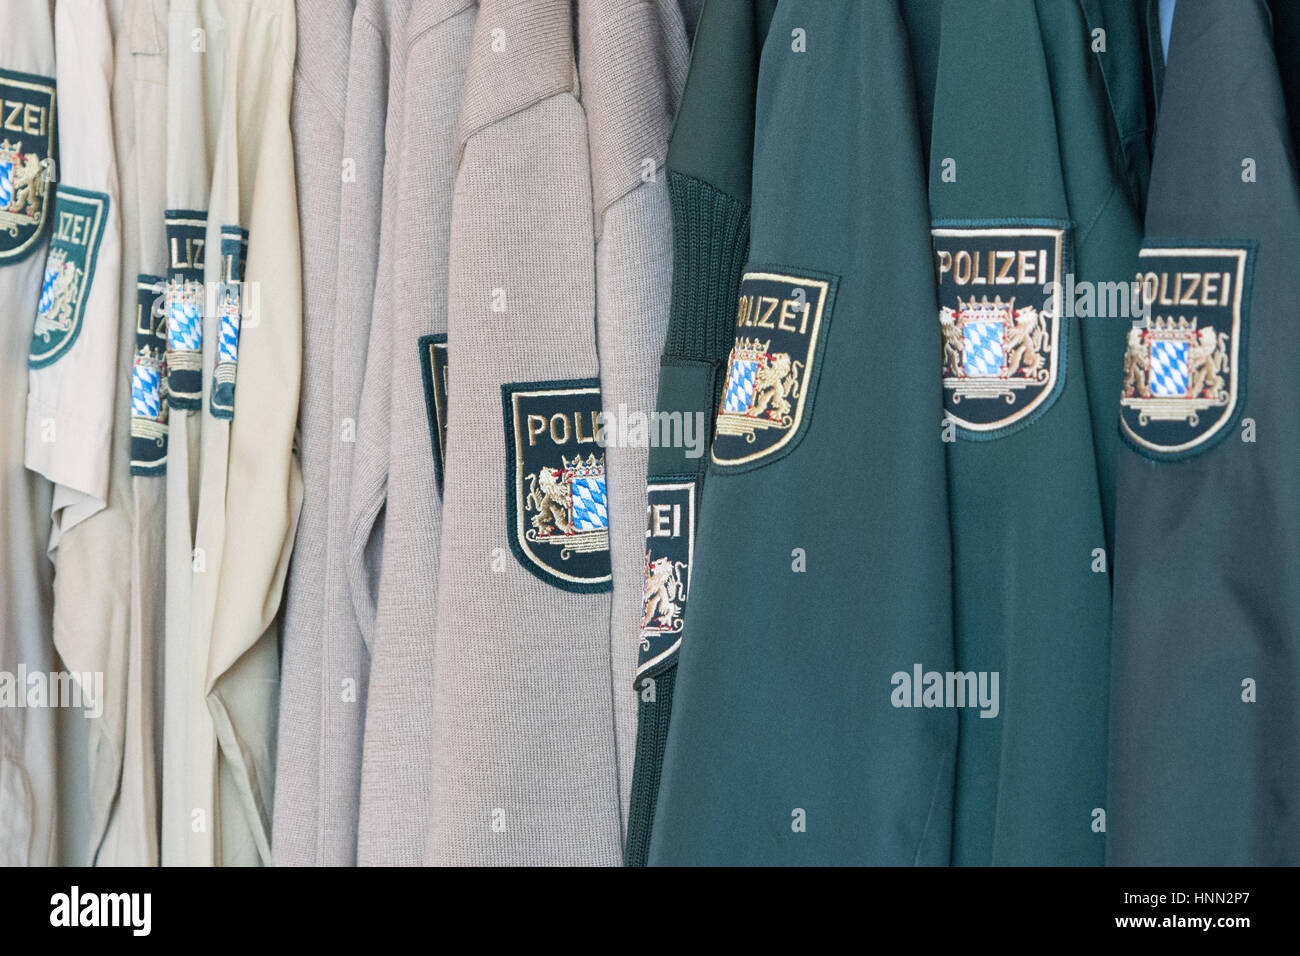 Straubing, Germany. 15th Feb, 2017. Old police uniforms hang on a coatrack in Straubing, Germany, 15 February 2017. The old, green uniforms will be remodeled after the Bavarian Police switches to blue uniforms. Photo: Armin Weigel/dpa/Alamy Live News Stock Photo